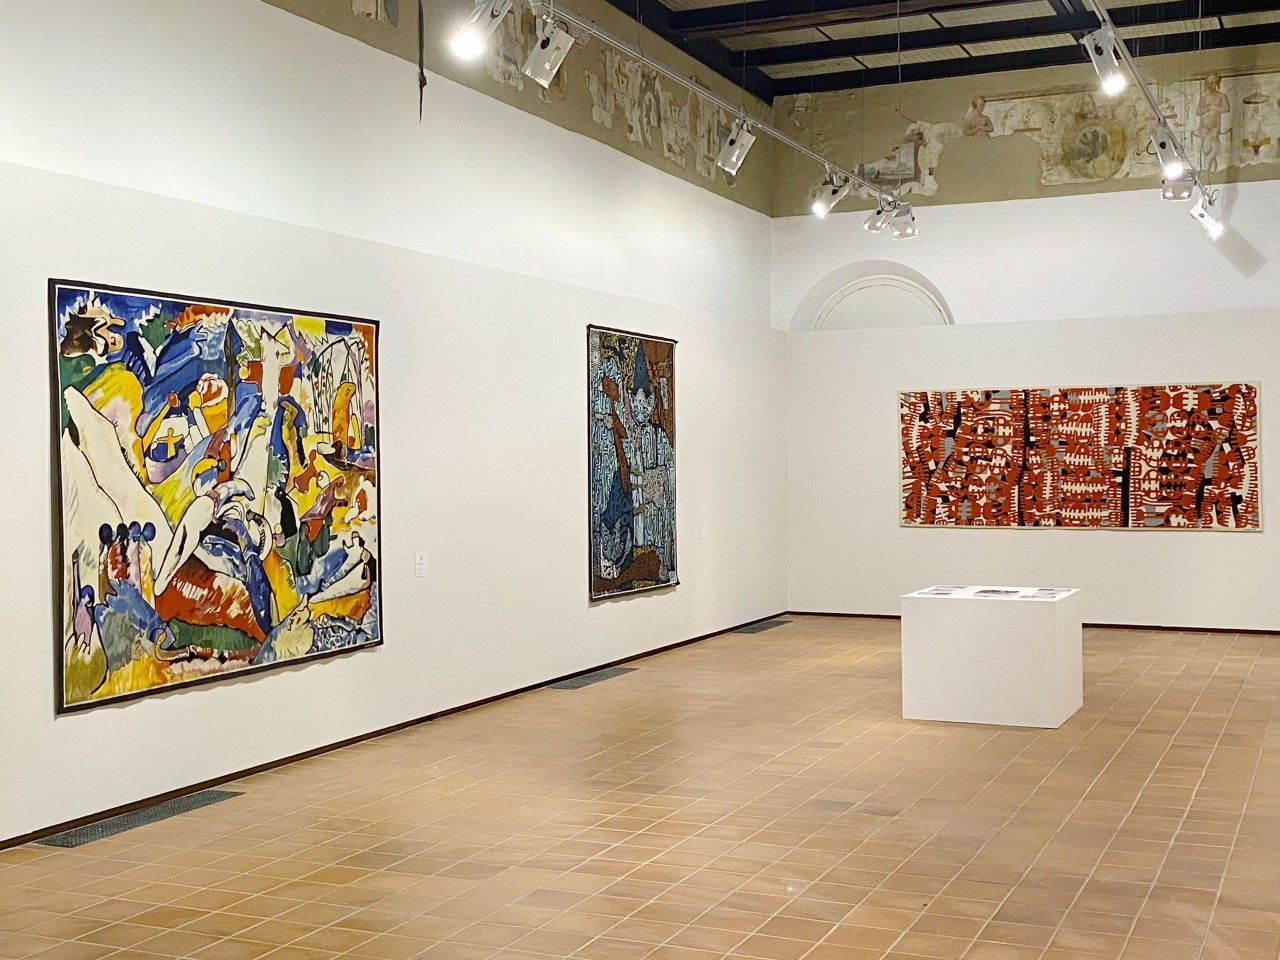 The Scassa tapestries on display for the fifth edition of the important art event